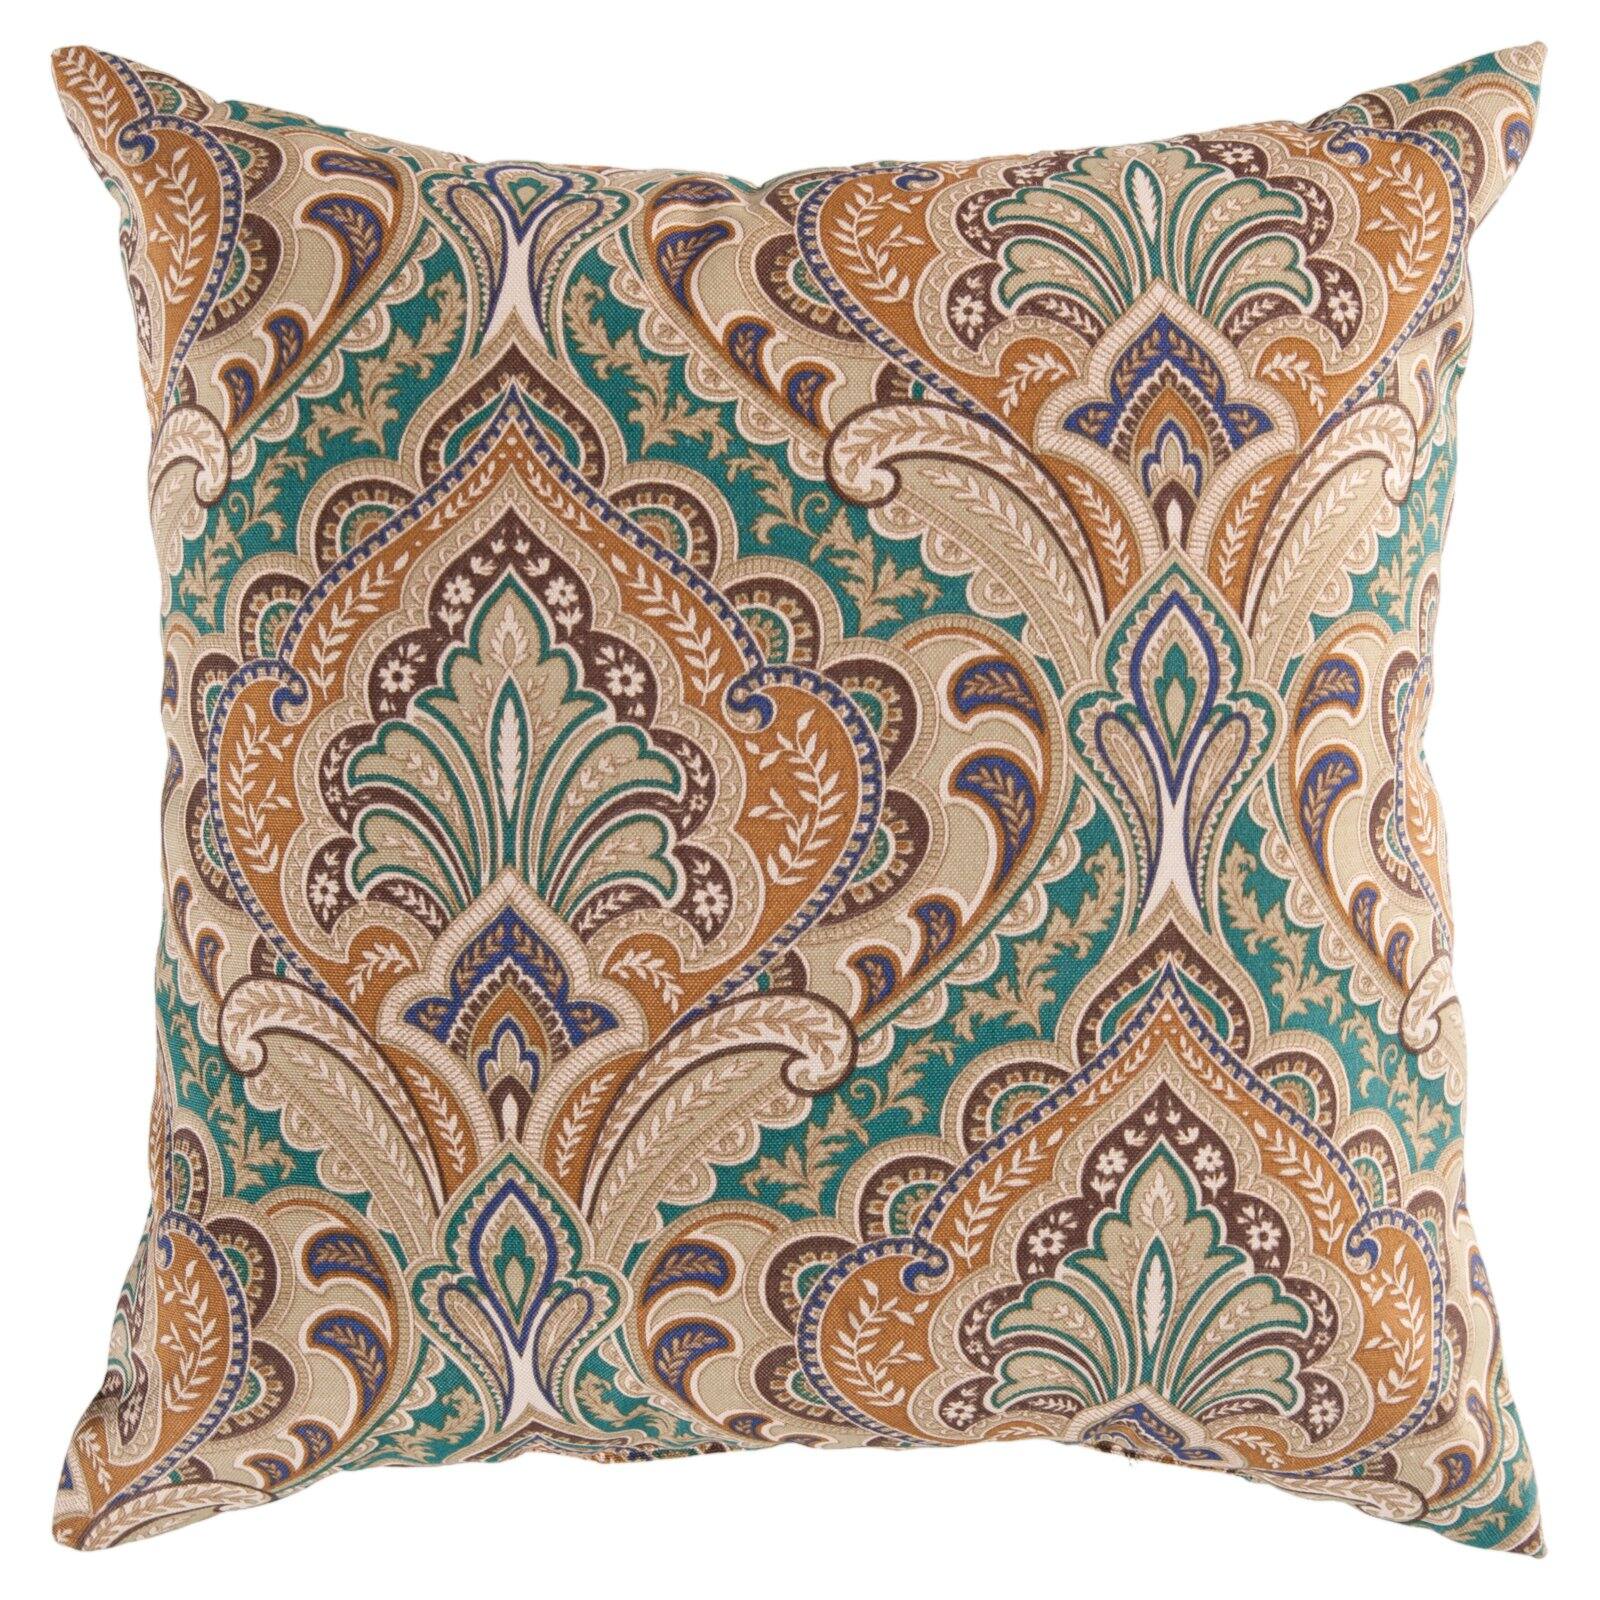 Surya 18 x 18 in. Polyester Decorative Pillow - image 2 of 2